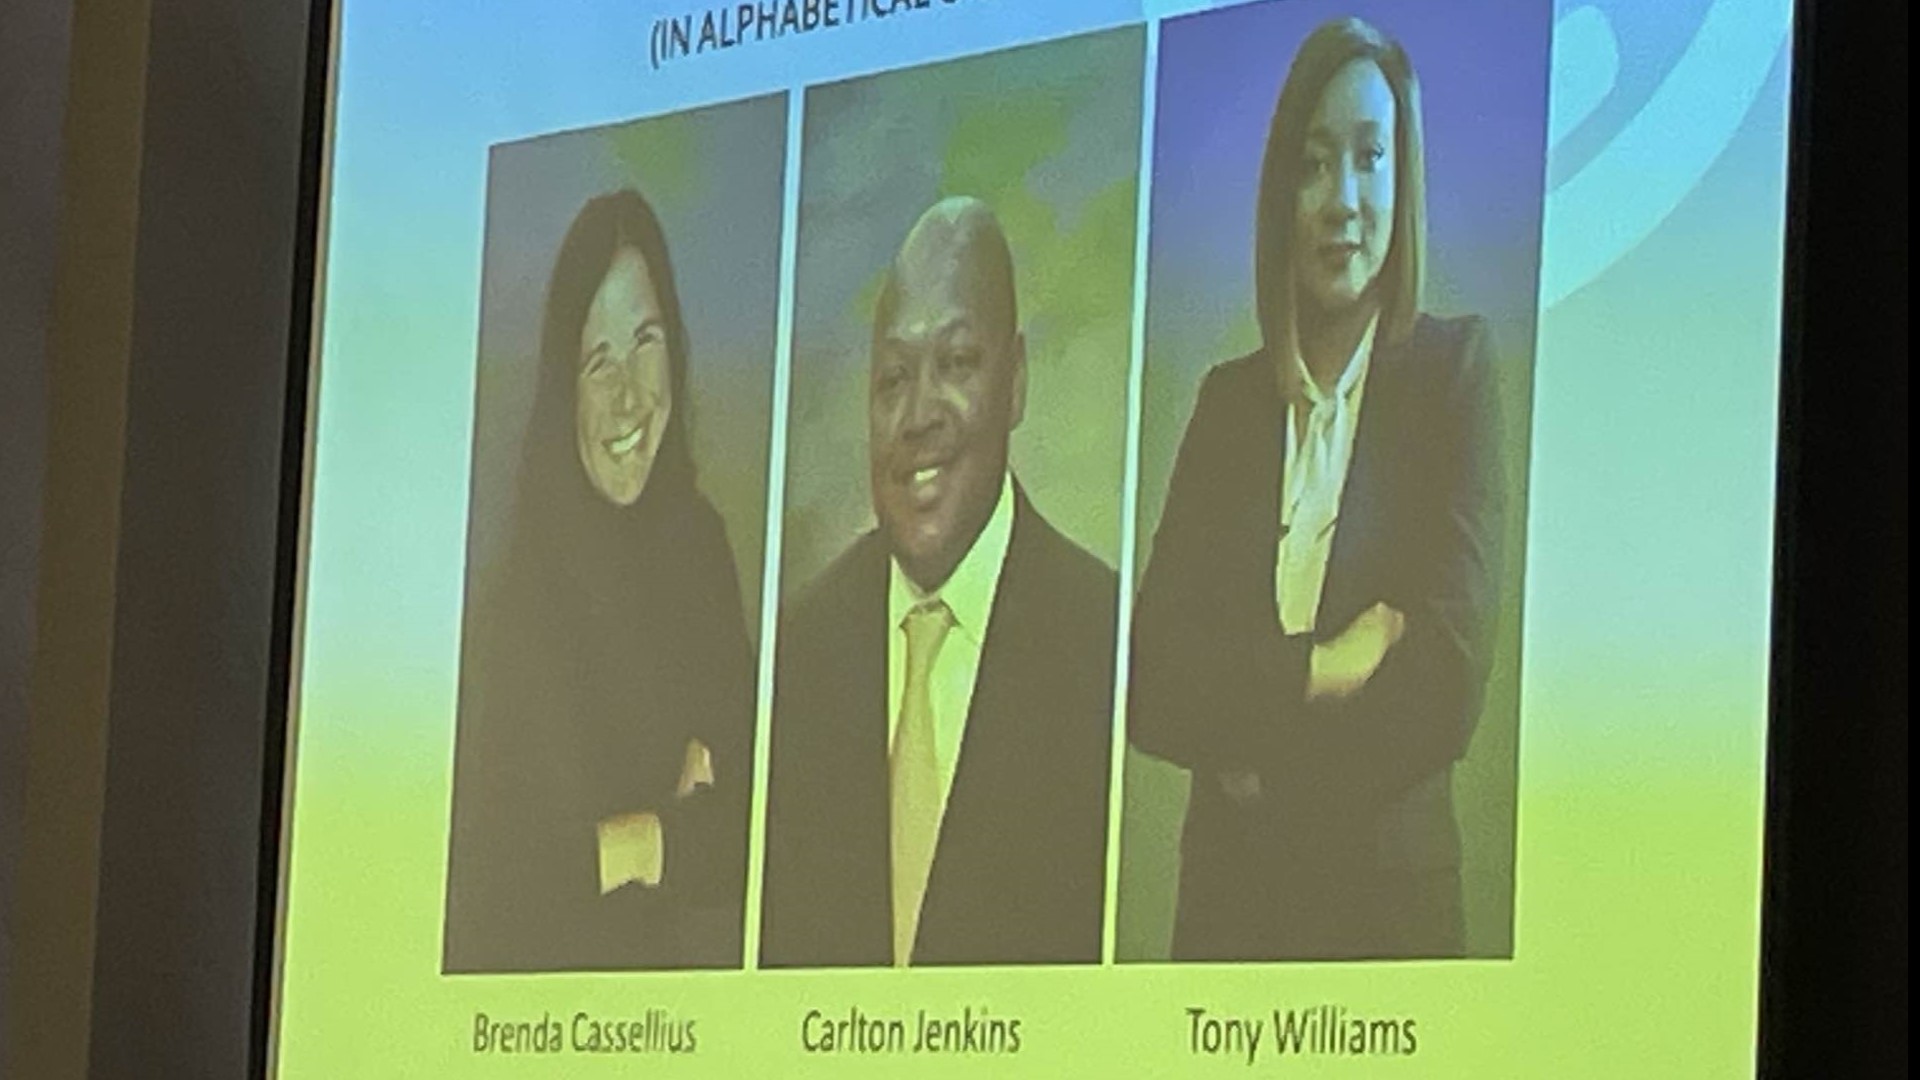 Dr. Brenda Casselius and Dr. Carlton Jenkins were announced with Toni Williams as finalists. The MSCS Board said they want to see more names before they proceed.